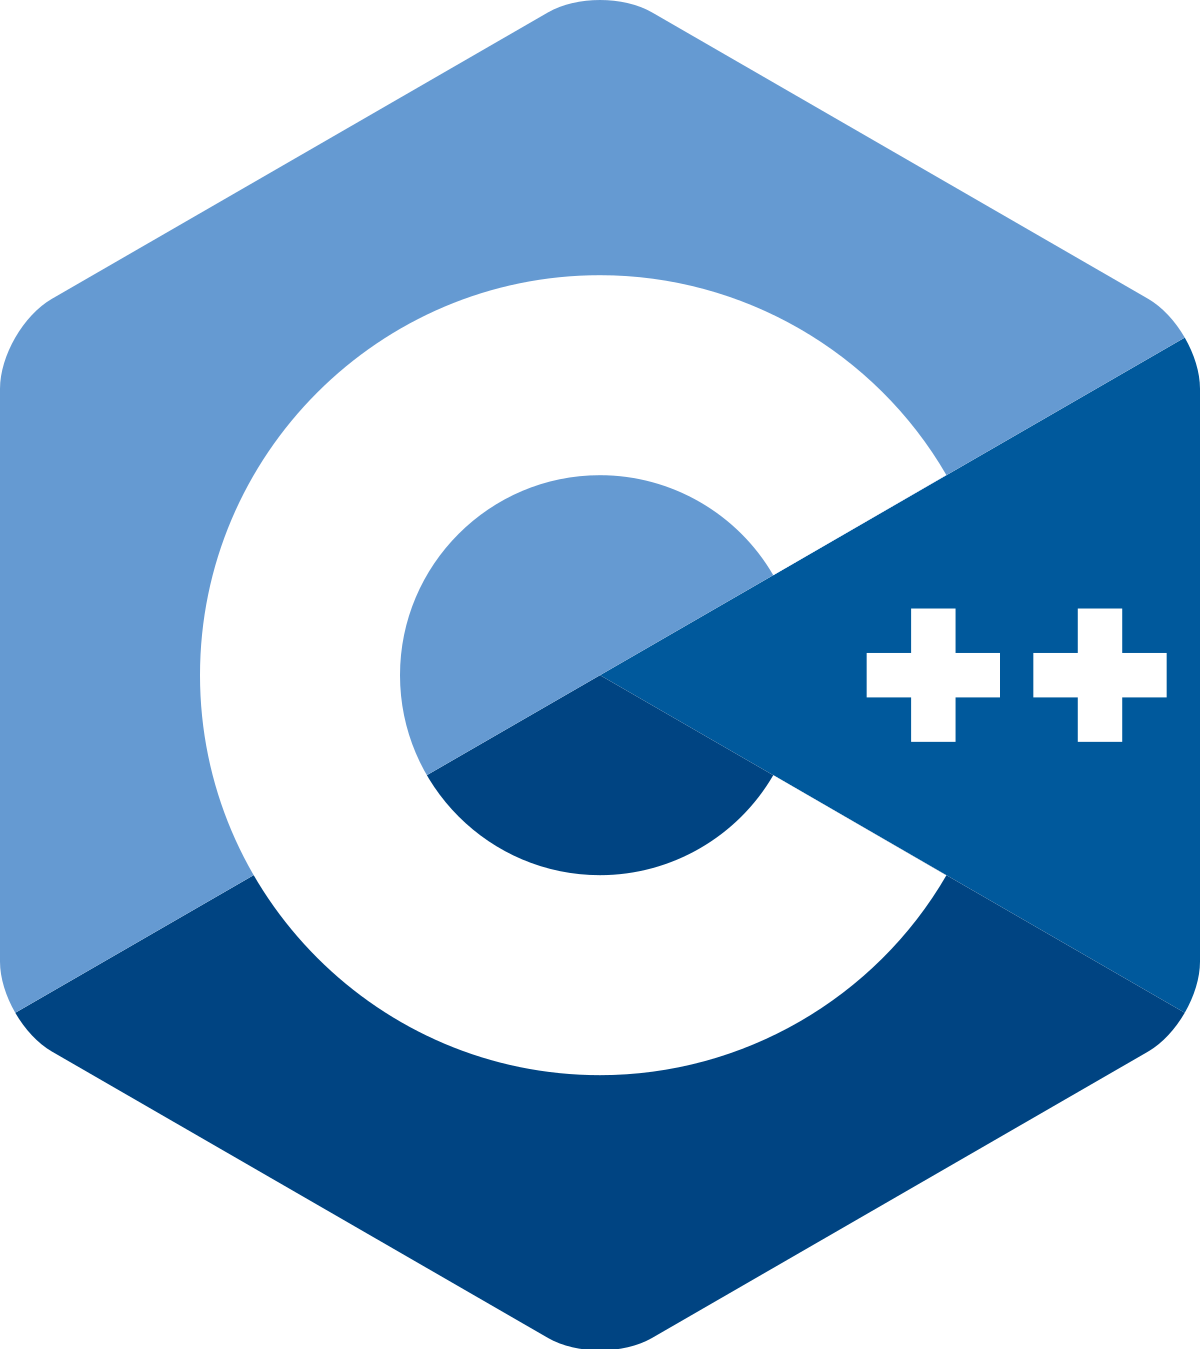 In Which Software You Should Use C++?